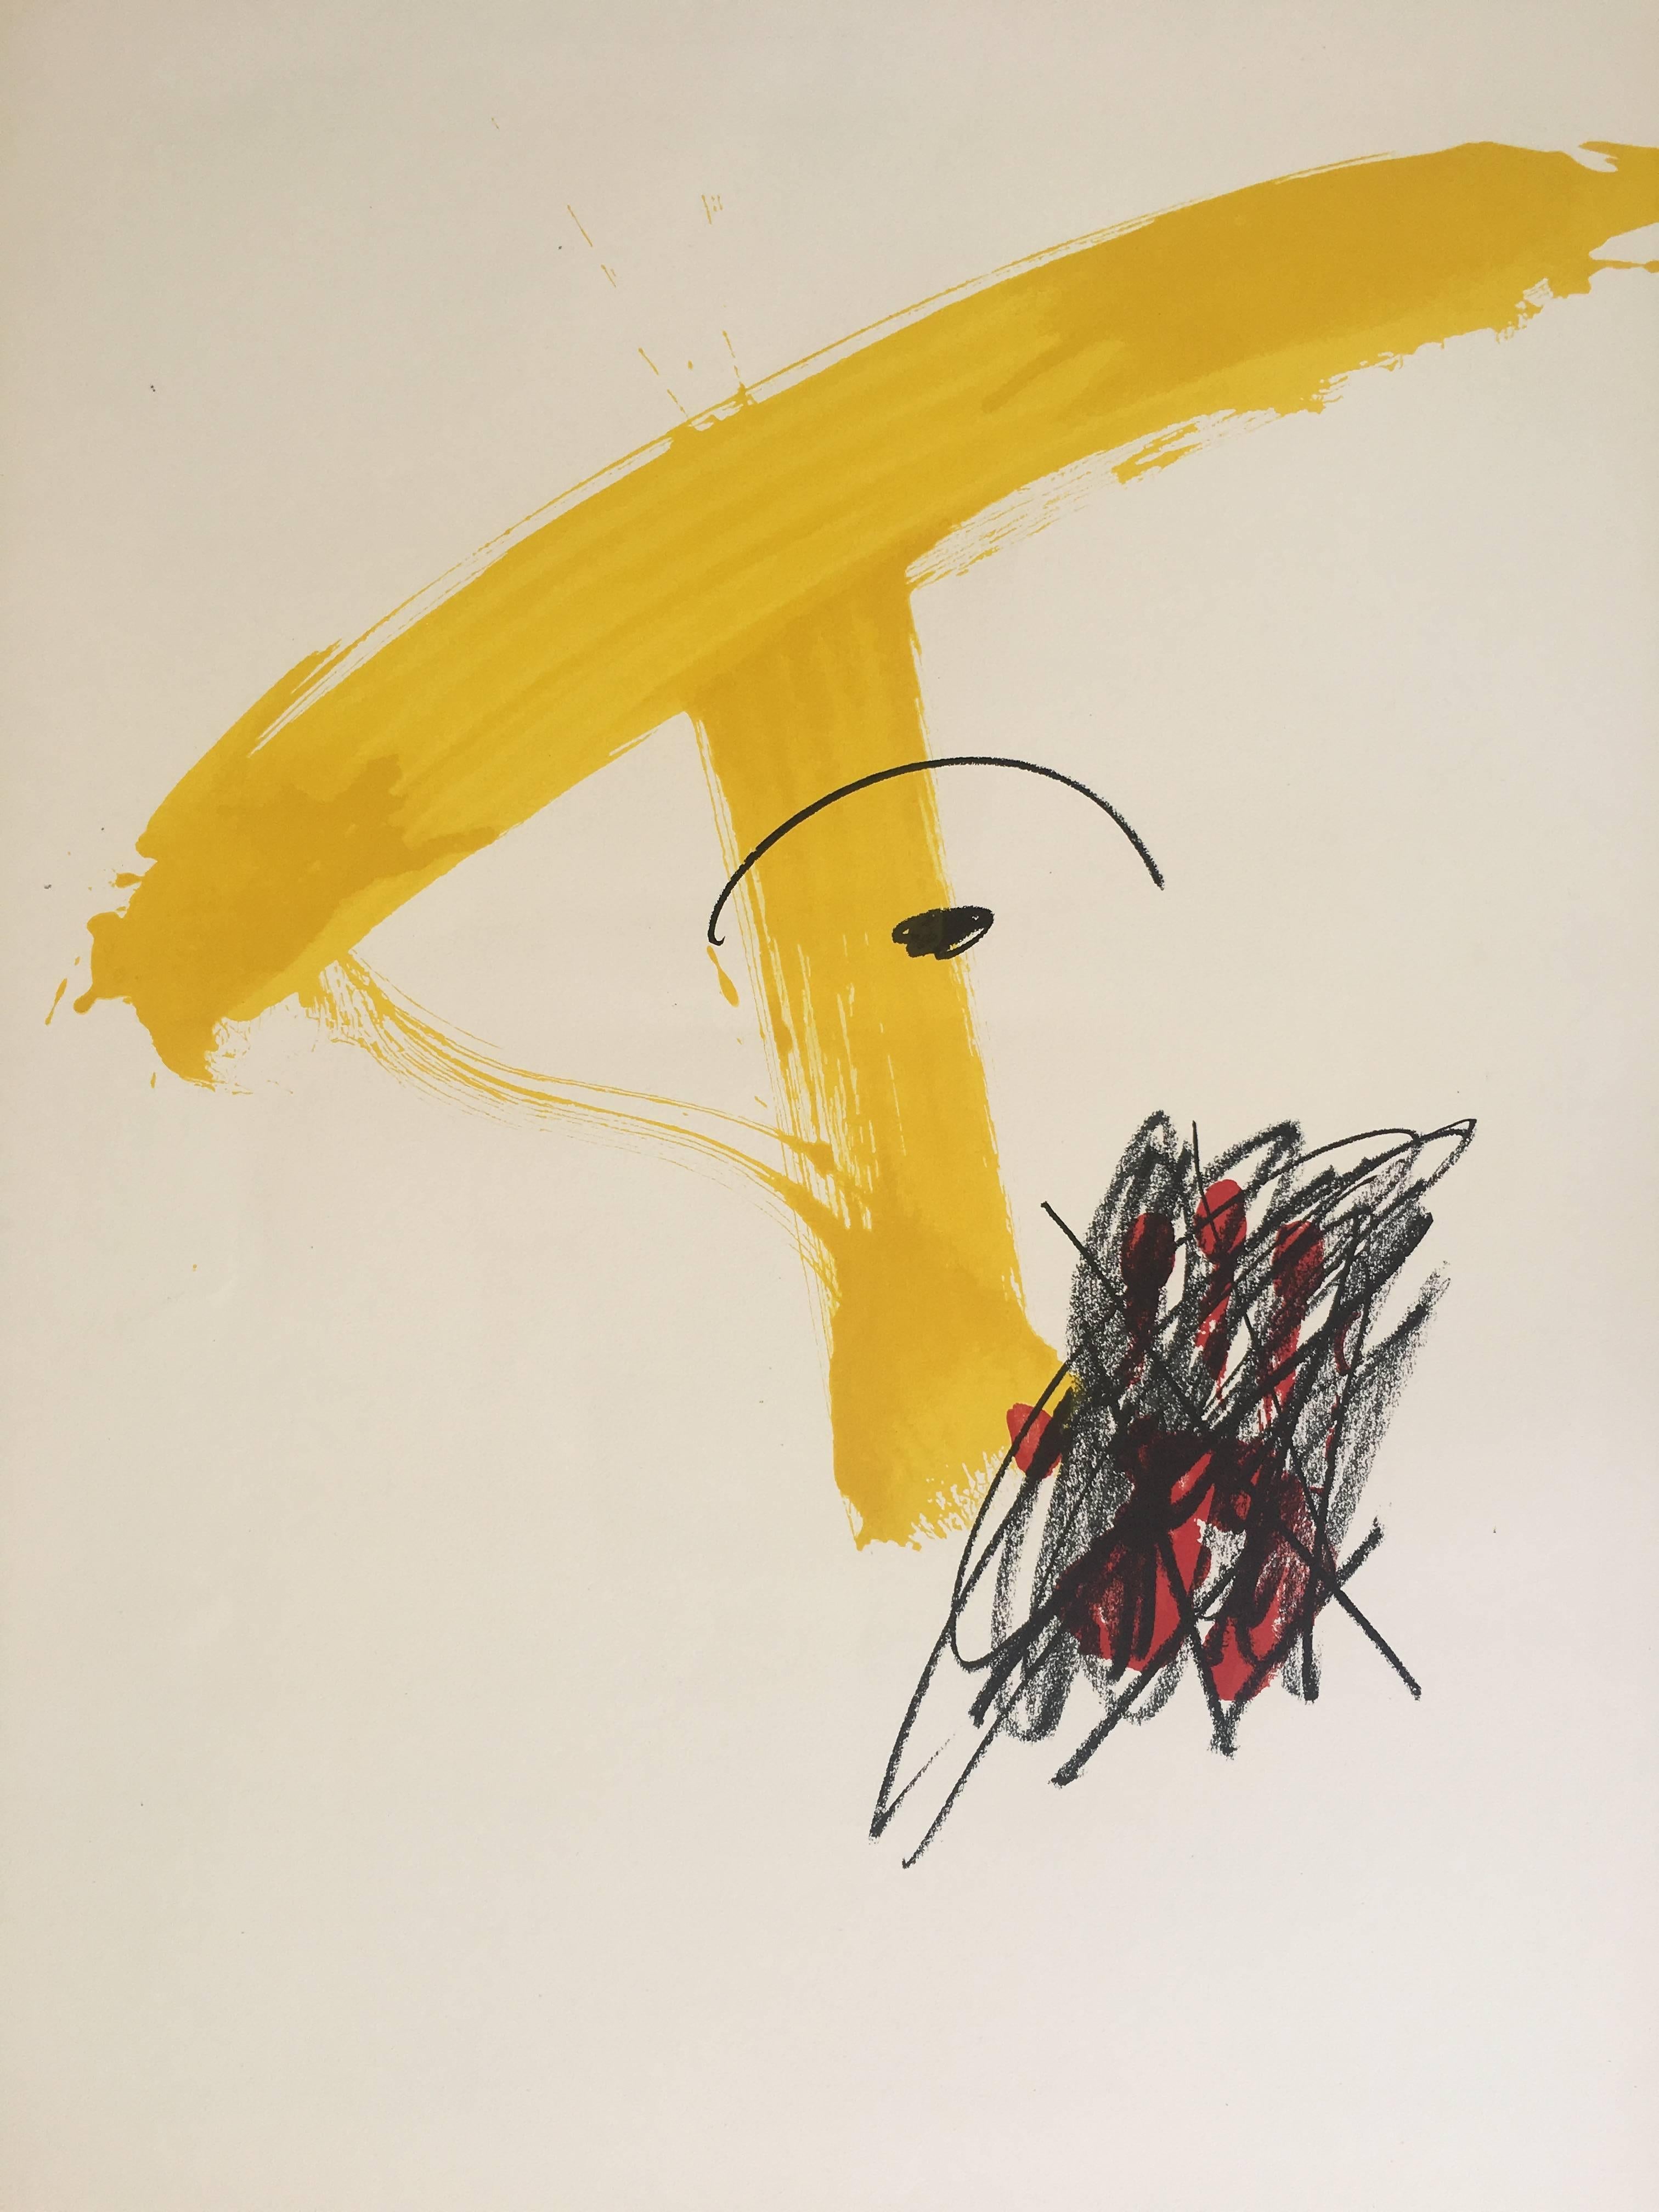 ANTONI TAPIES was the leader of Spanish abstract art of the 20th century. His works are represented in museums and foundations around the world.

Graphic work of the Spanish teacher Antoni TAPIES.
Original lithograph.
Signed in pencil by the